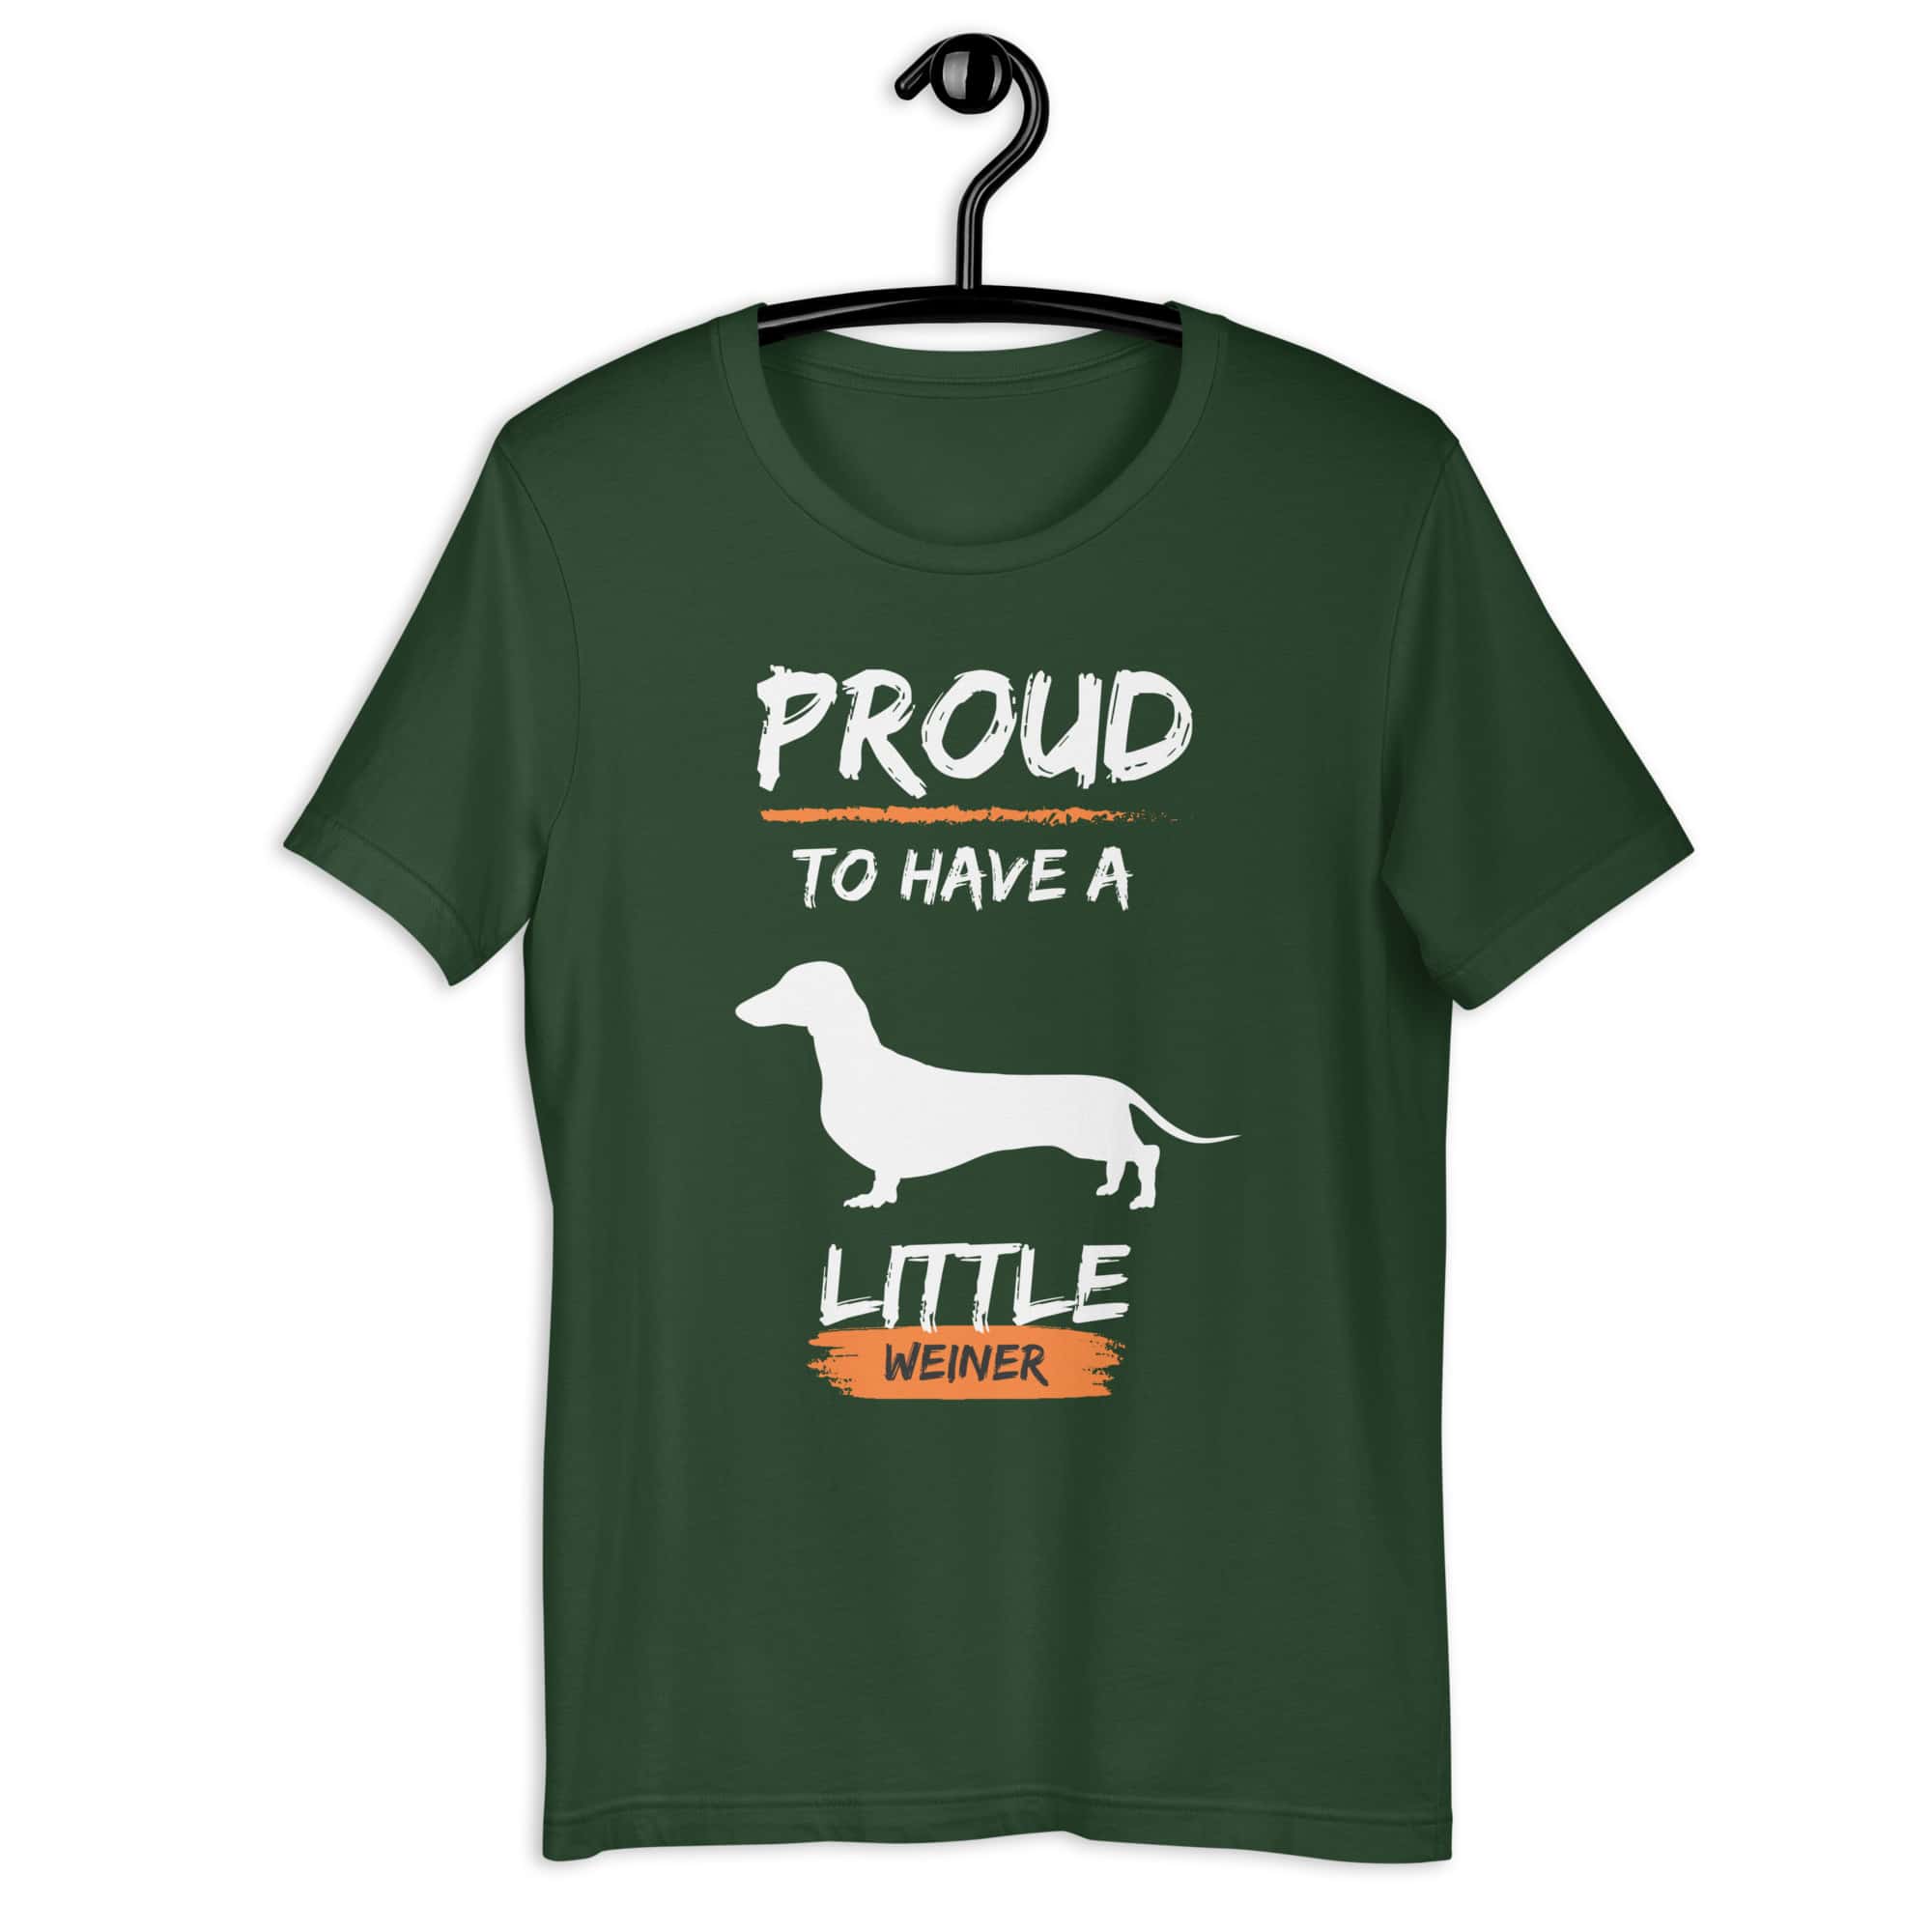 Proud To Have Little Weiner Unisex T-Shirt. Forest